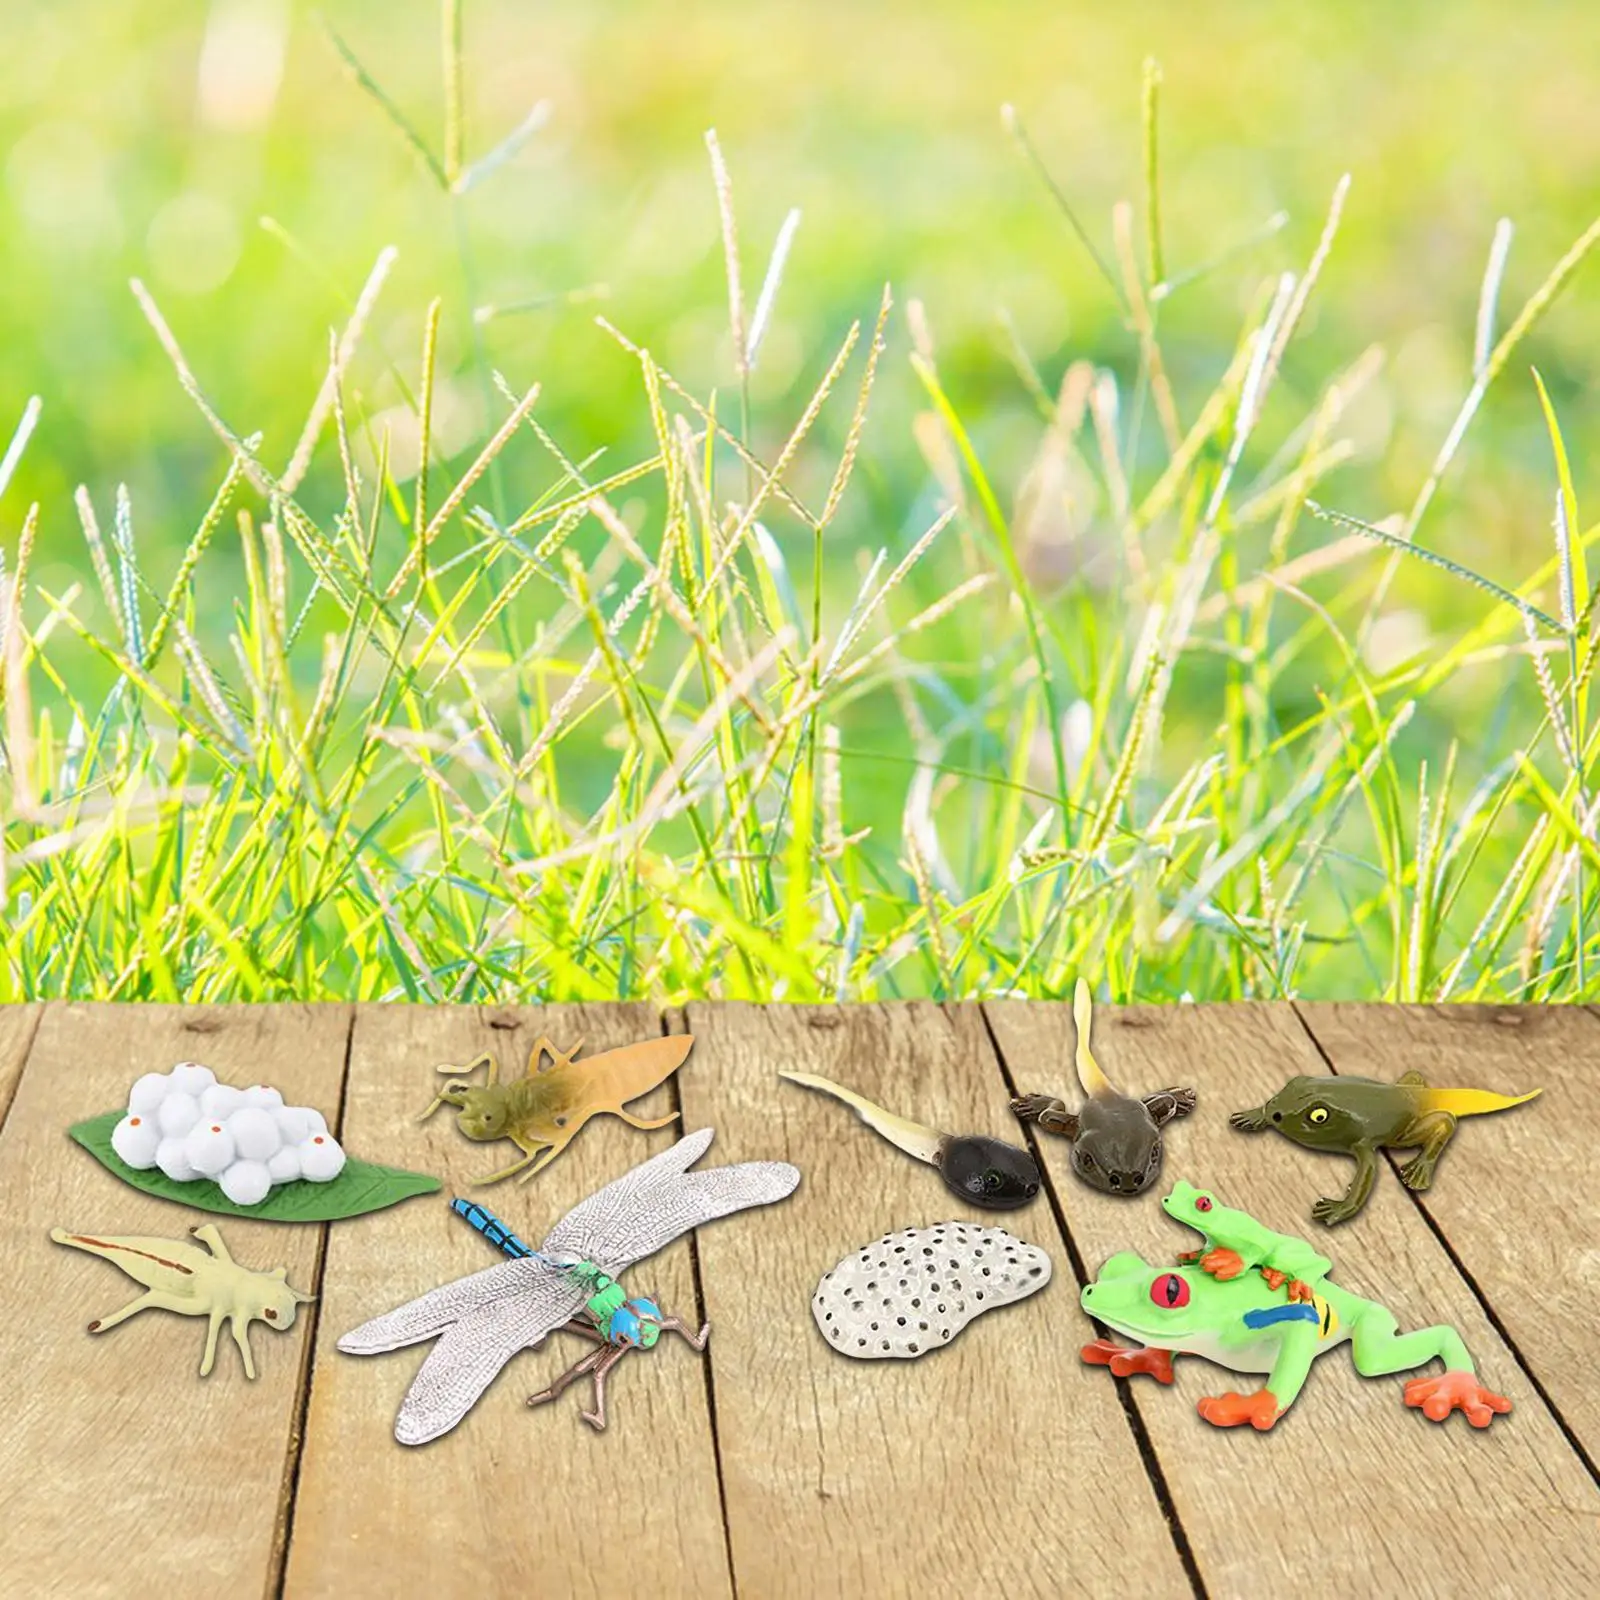 life Cycle Figurines , Dragonfly ,Red Eyed Tree Frog Figures for Preschool